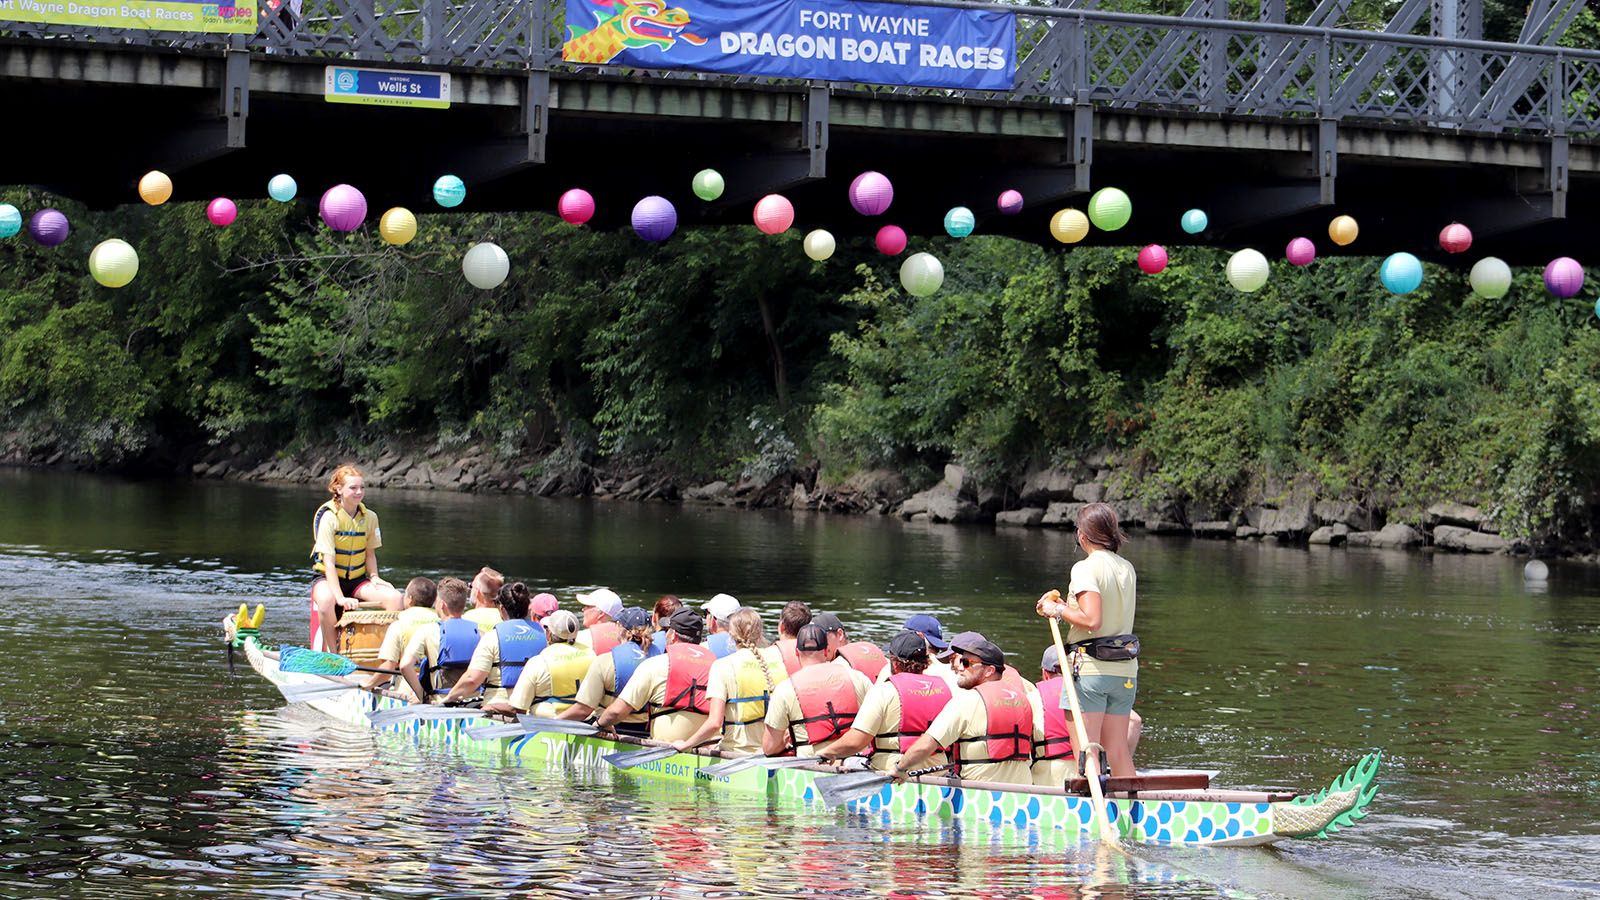 The dragon boat races include 20 paddlers and once drummer to keep the pace.